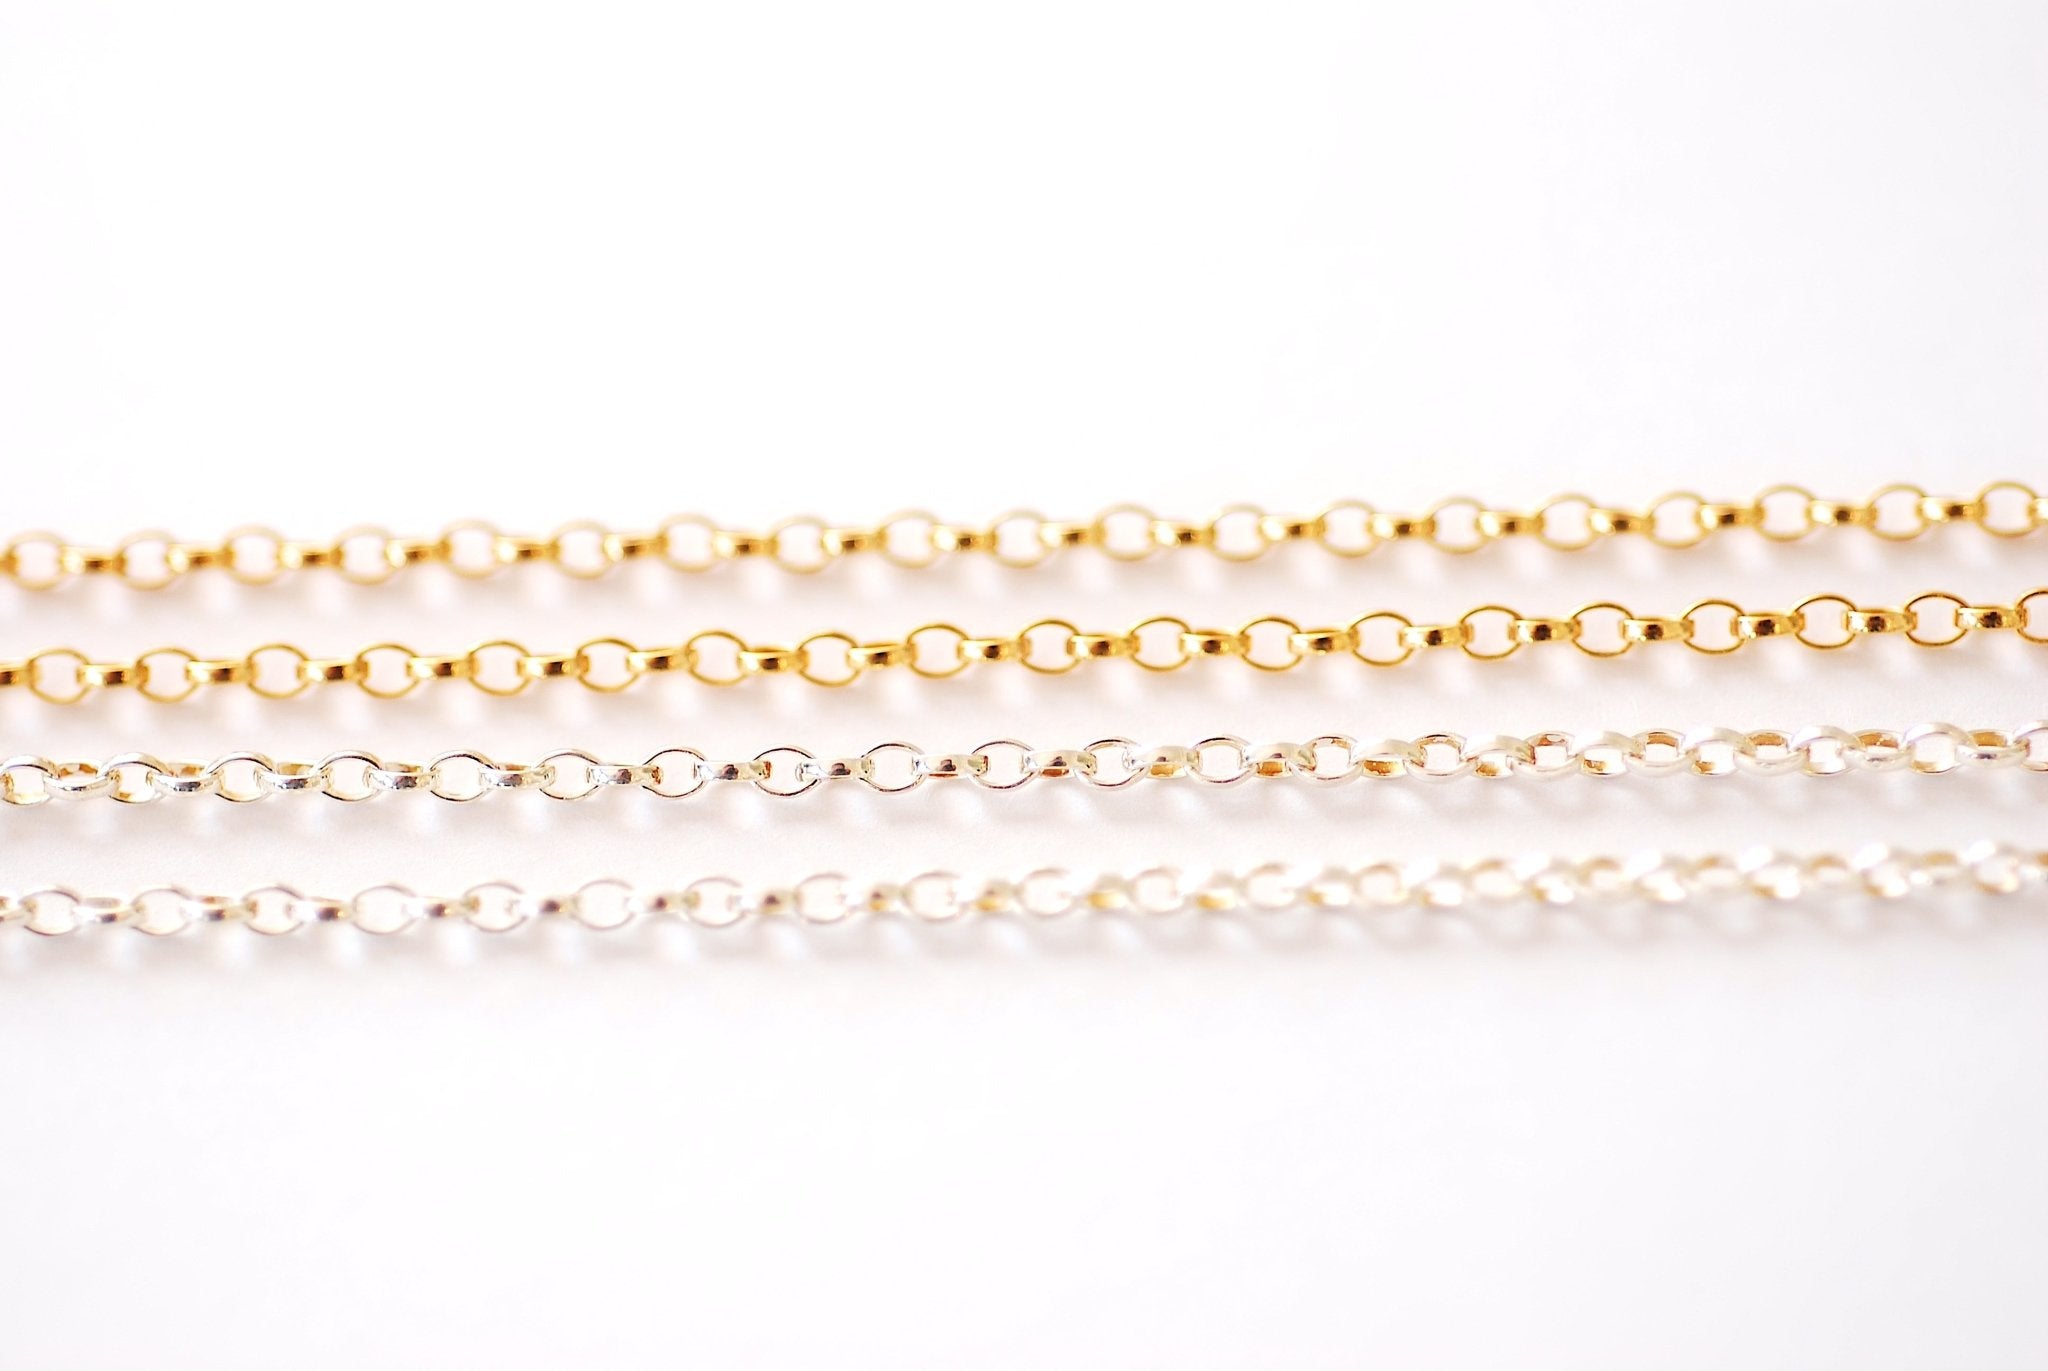 Gold Filled Rolo Chain l 1.8mm x 2.6mm Width Oval Rolo Chain l Wholesale Gold Filled Sterling Silver Chain Permanent Jewelry Necklace Chain - HarperCrown